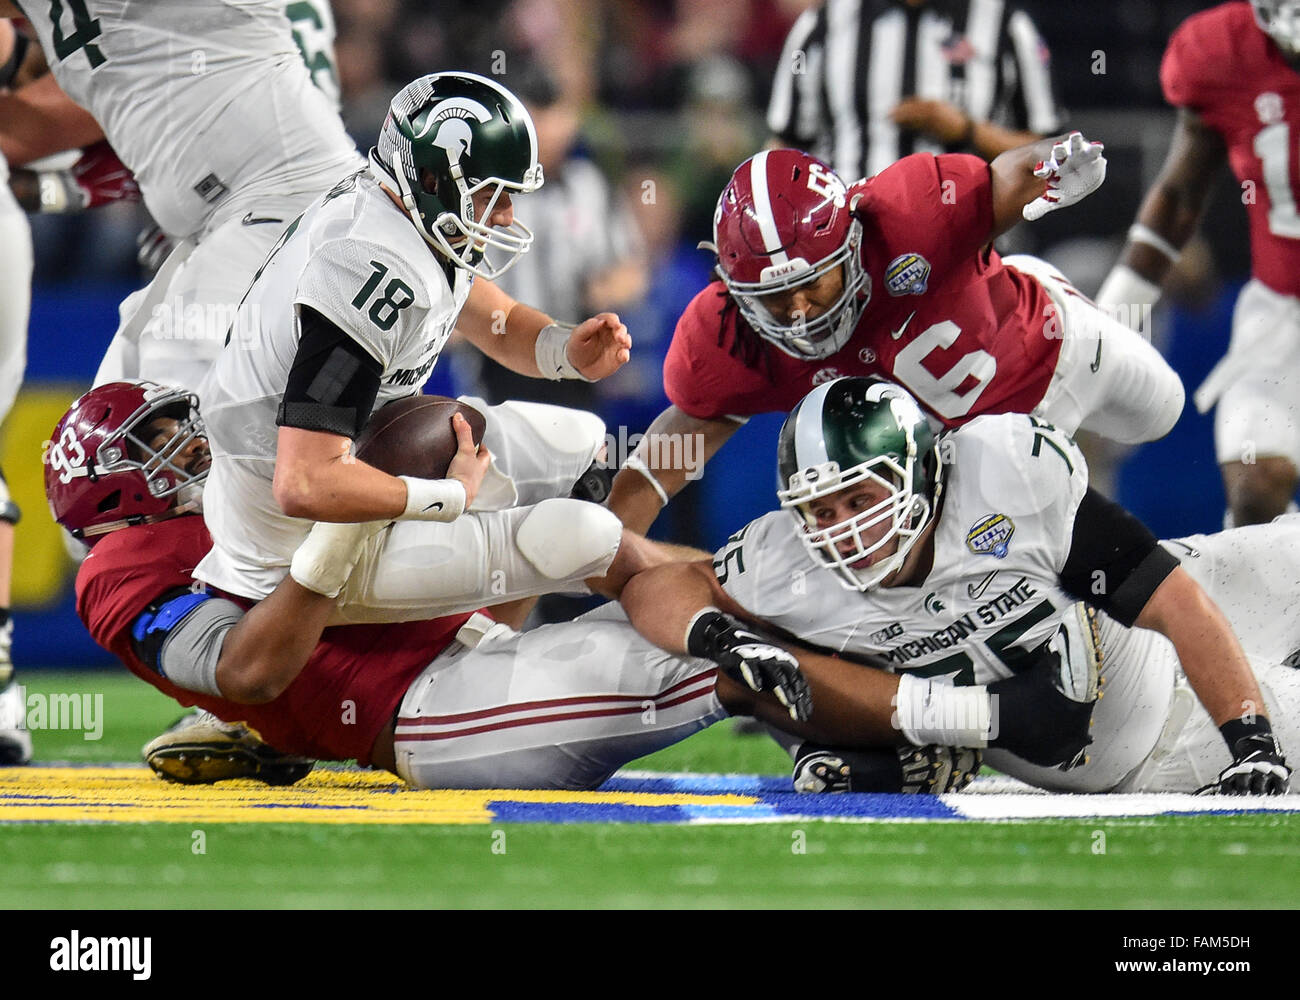 Arlington, Texas. 31st Dec, 2015. Michigan State Spartans quarterback Connor Cook (18) looks down field as Alabama Crimson Tide defensive lineman Jonathan Allen (93) rushes and gets a sack during the 2015 Goodyear Cotton Bowl game between the Michigan State Spartans and Alabama Crimson Tide at the AT&T Stadium in Arlington Texas.Alabama wins 38-0. Credit:  Manny Flores/Cal Sport Media/Alamy Live News Stock Photo